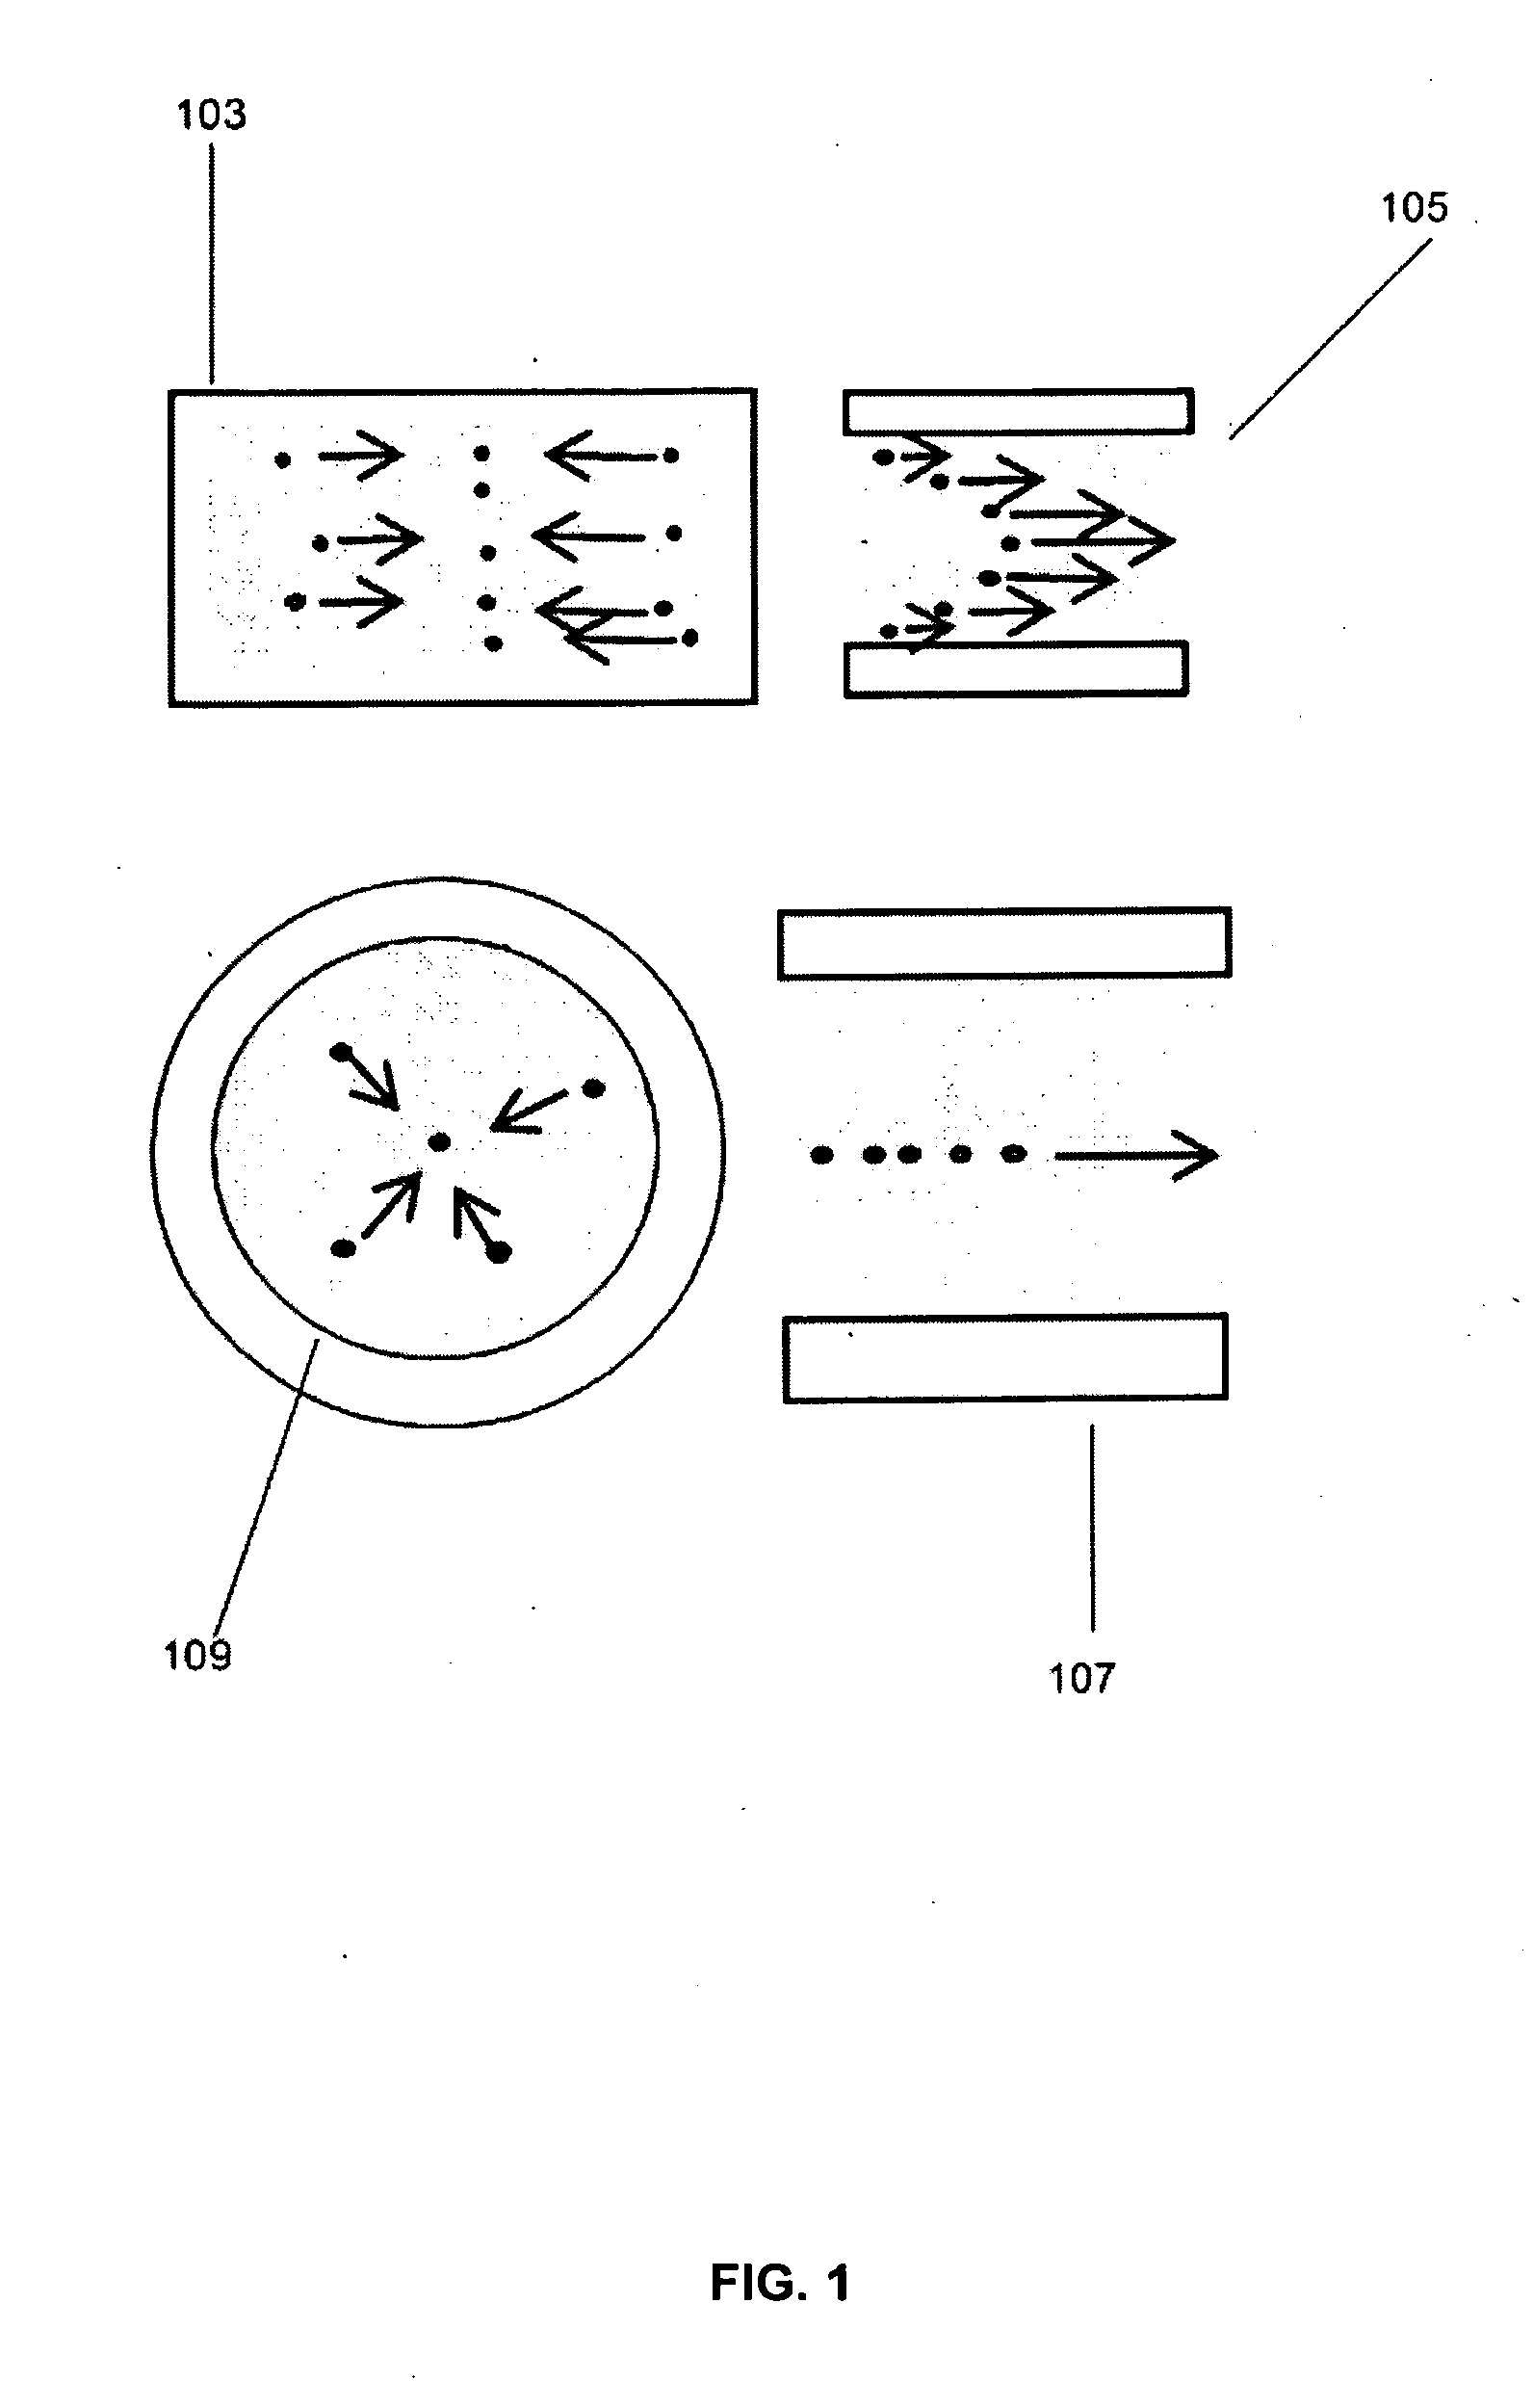 Particle Analyzing Systems and Methods Using Acoustic Radiation Pressure